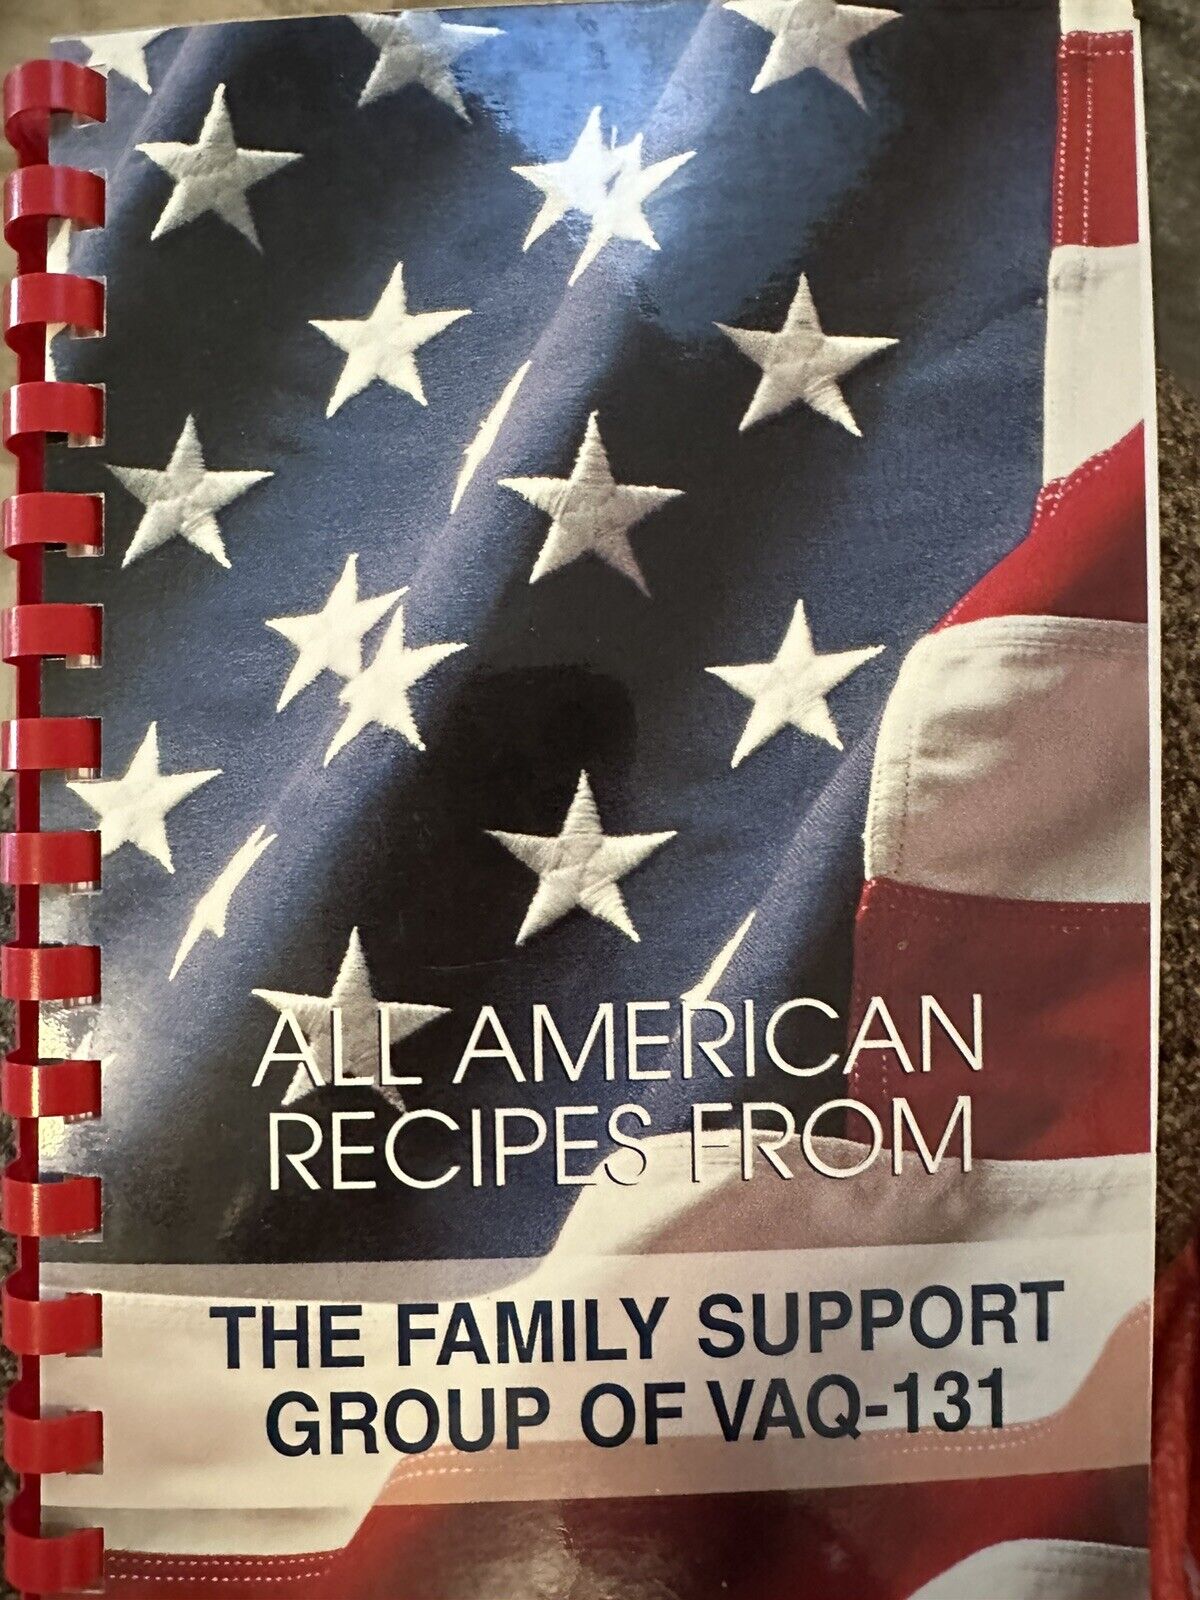 ELECTRONIC ATTACK SQUADRON (VAQ-131) FAMILY SUPPORT GROUP US NAVY COOKBOOK